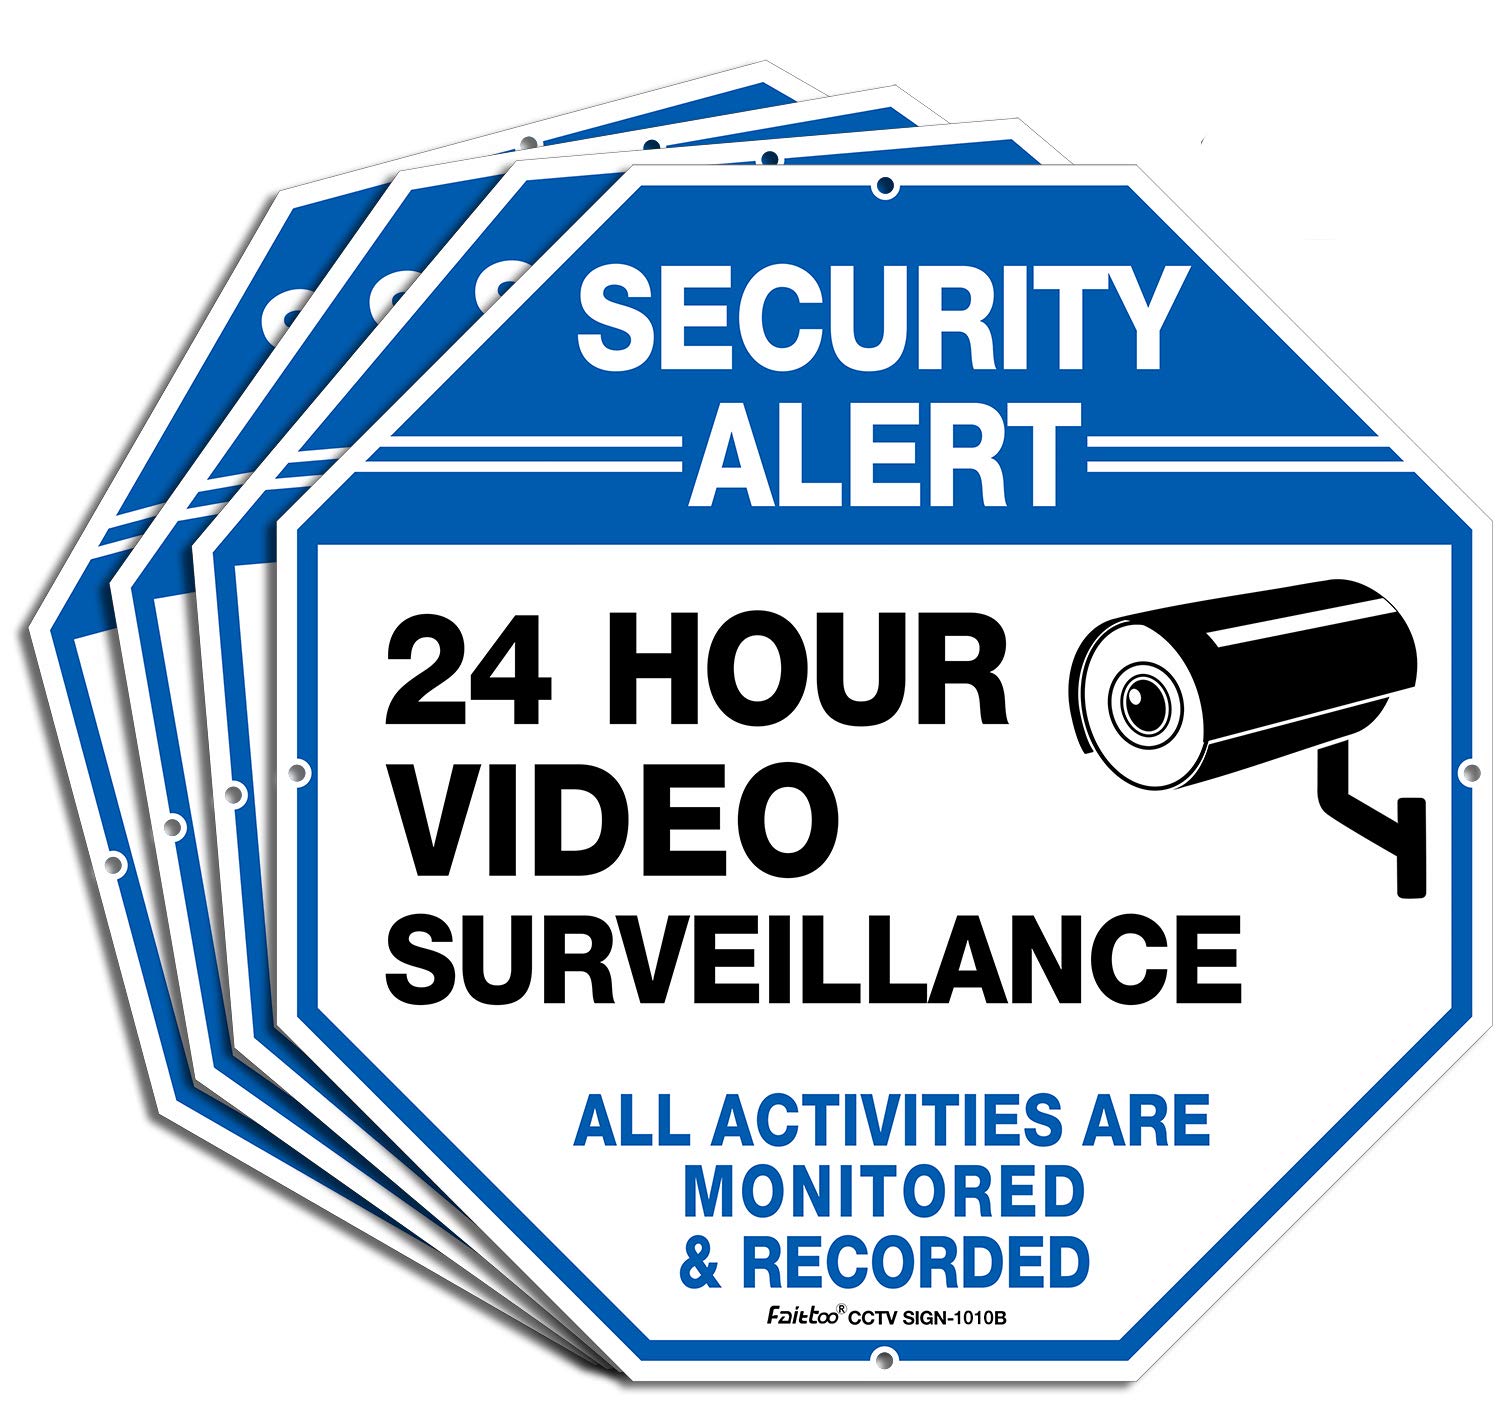 (4 Pack)"Security Alert - 24 Hour Video Surveillance, All Activities Monitored" Signs,10 x 10 .040 Aluminum Reflective Warning Sign for Home Business CCTV Security Camera, Indoor or Outdoor Use,Blue